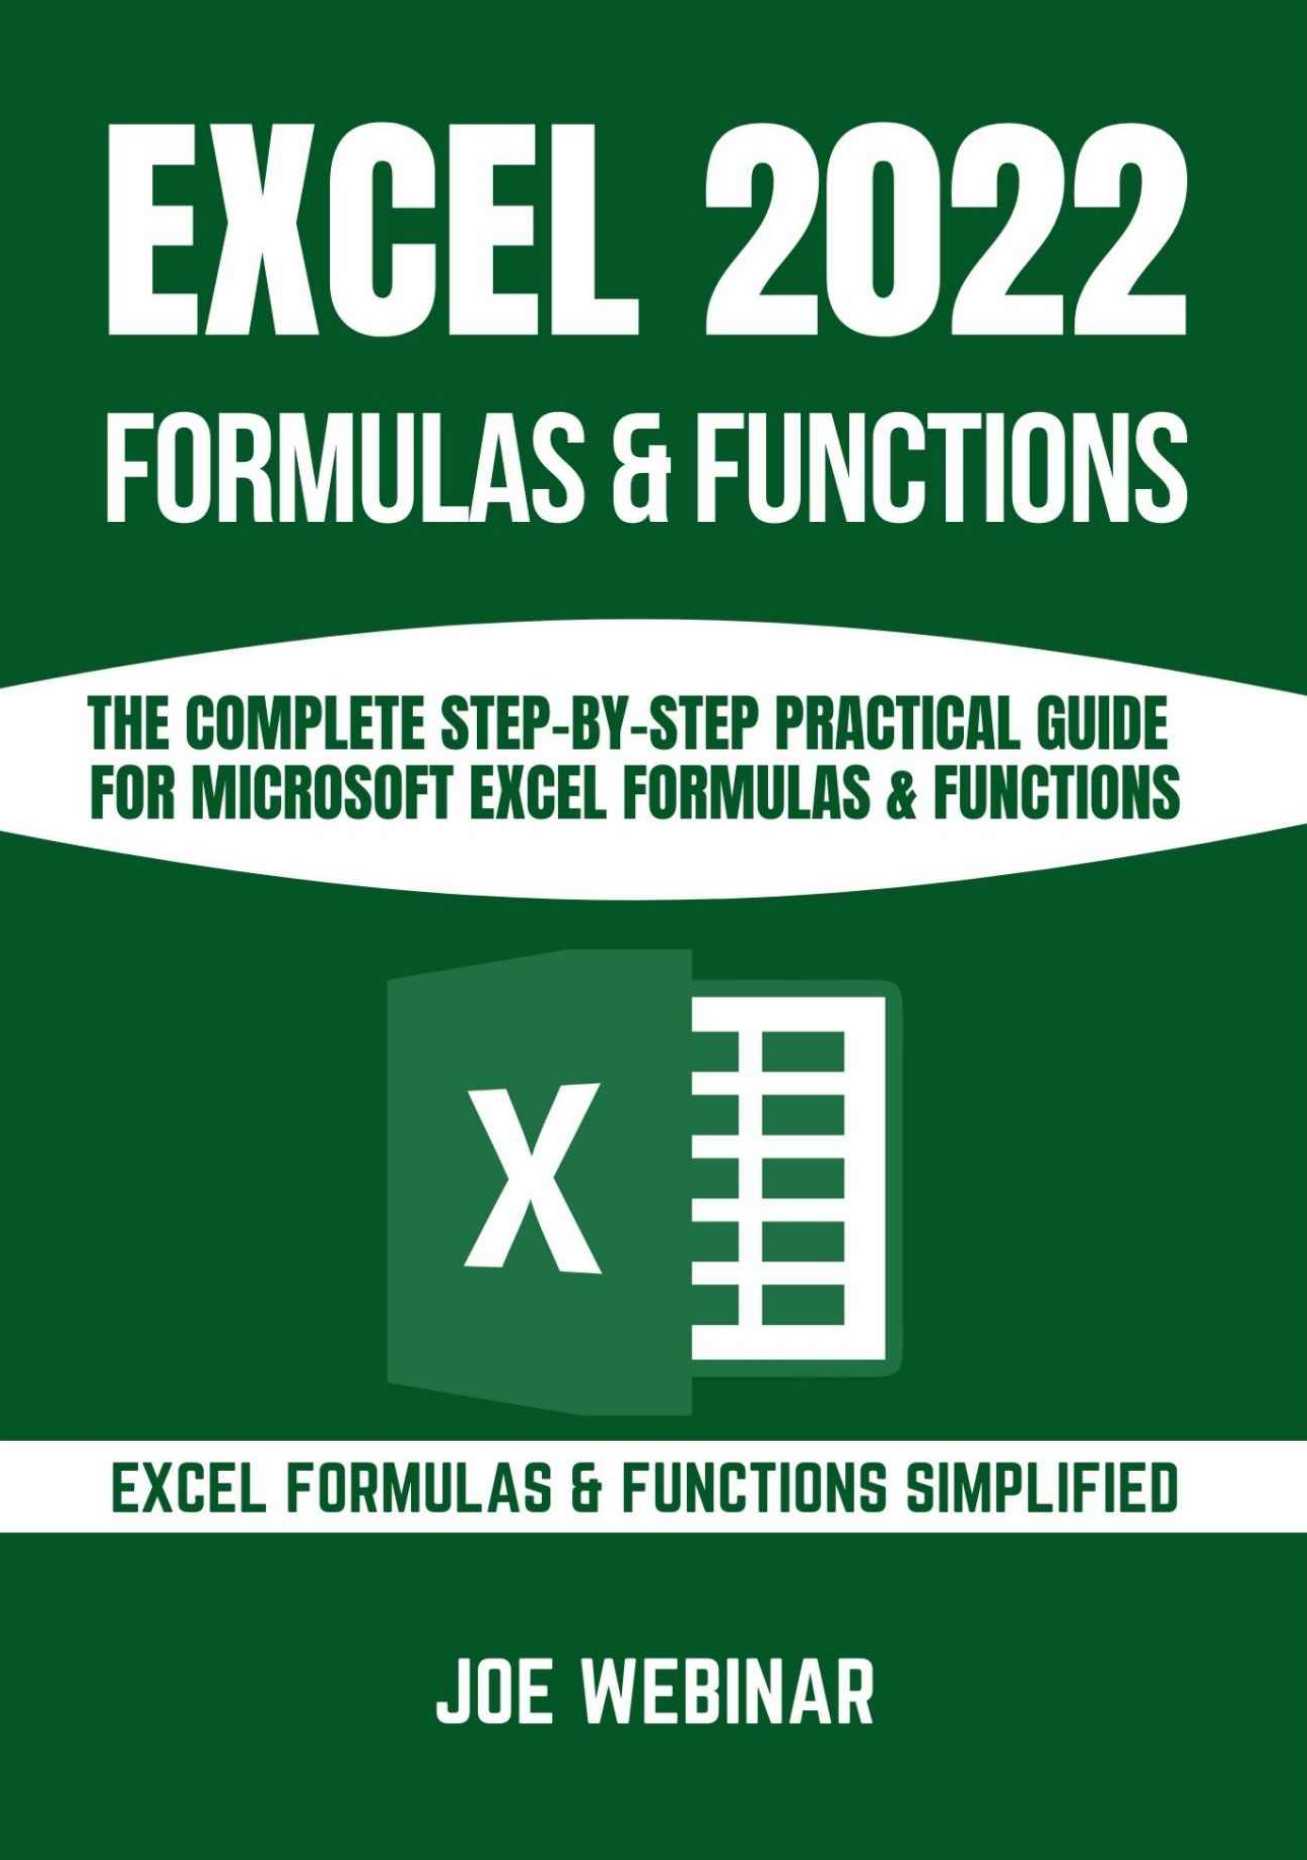 Excel 2022 Formulas & Functions: The Complete Step-By-Step Practical Guide for Microsoft Excel Formulas PDF